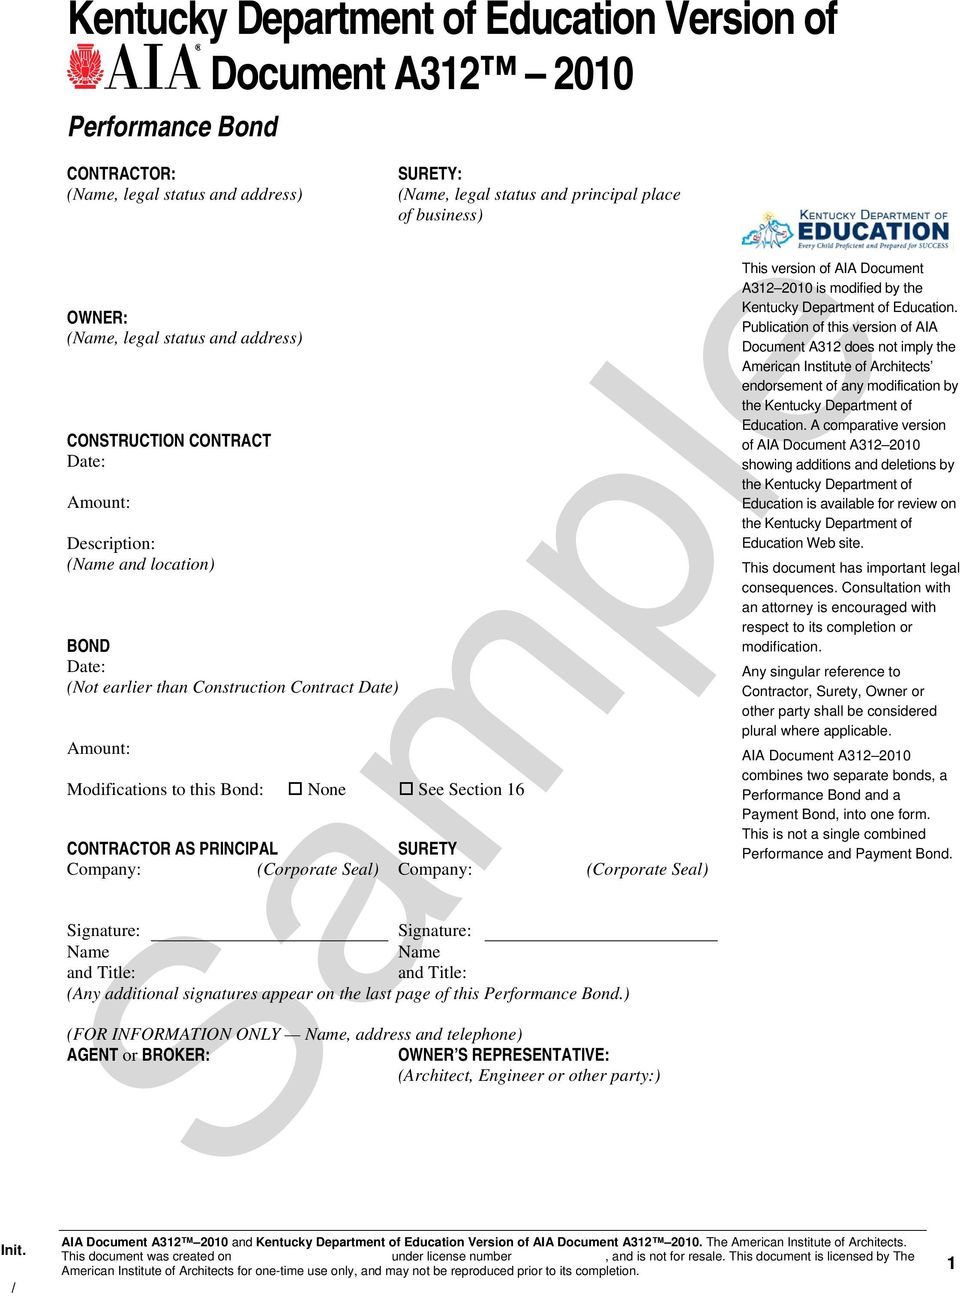 Section 16 CONTRACTOR AS PRINCIPAL SURETY Company: (Corporate Seal) Company: (Corporate Seal) This version of AIA Document A312 2010 is modified by the Kentucky Department of Education.